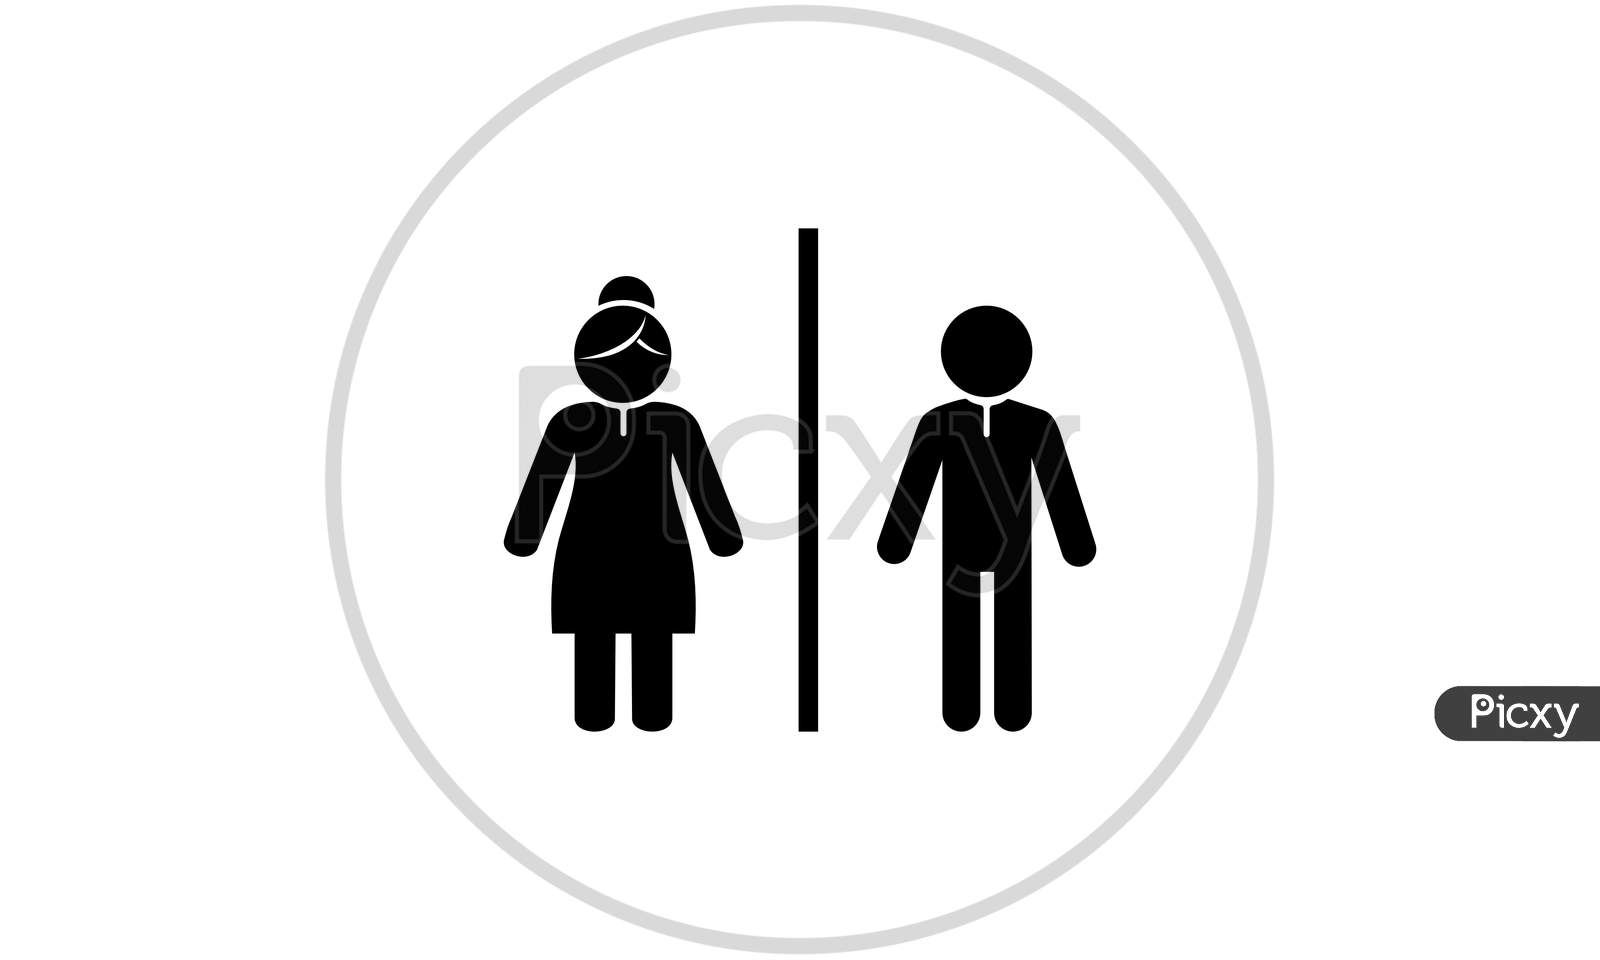 Man And Woman Sign For Restroom Or Toilet